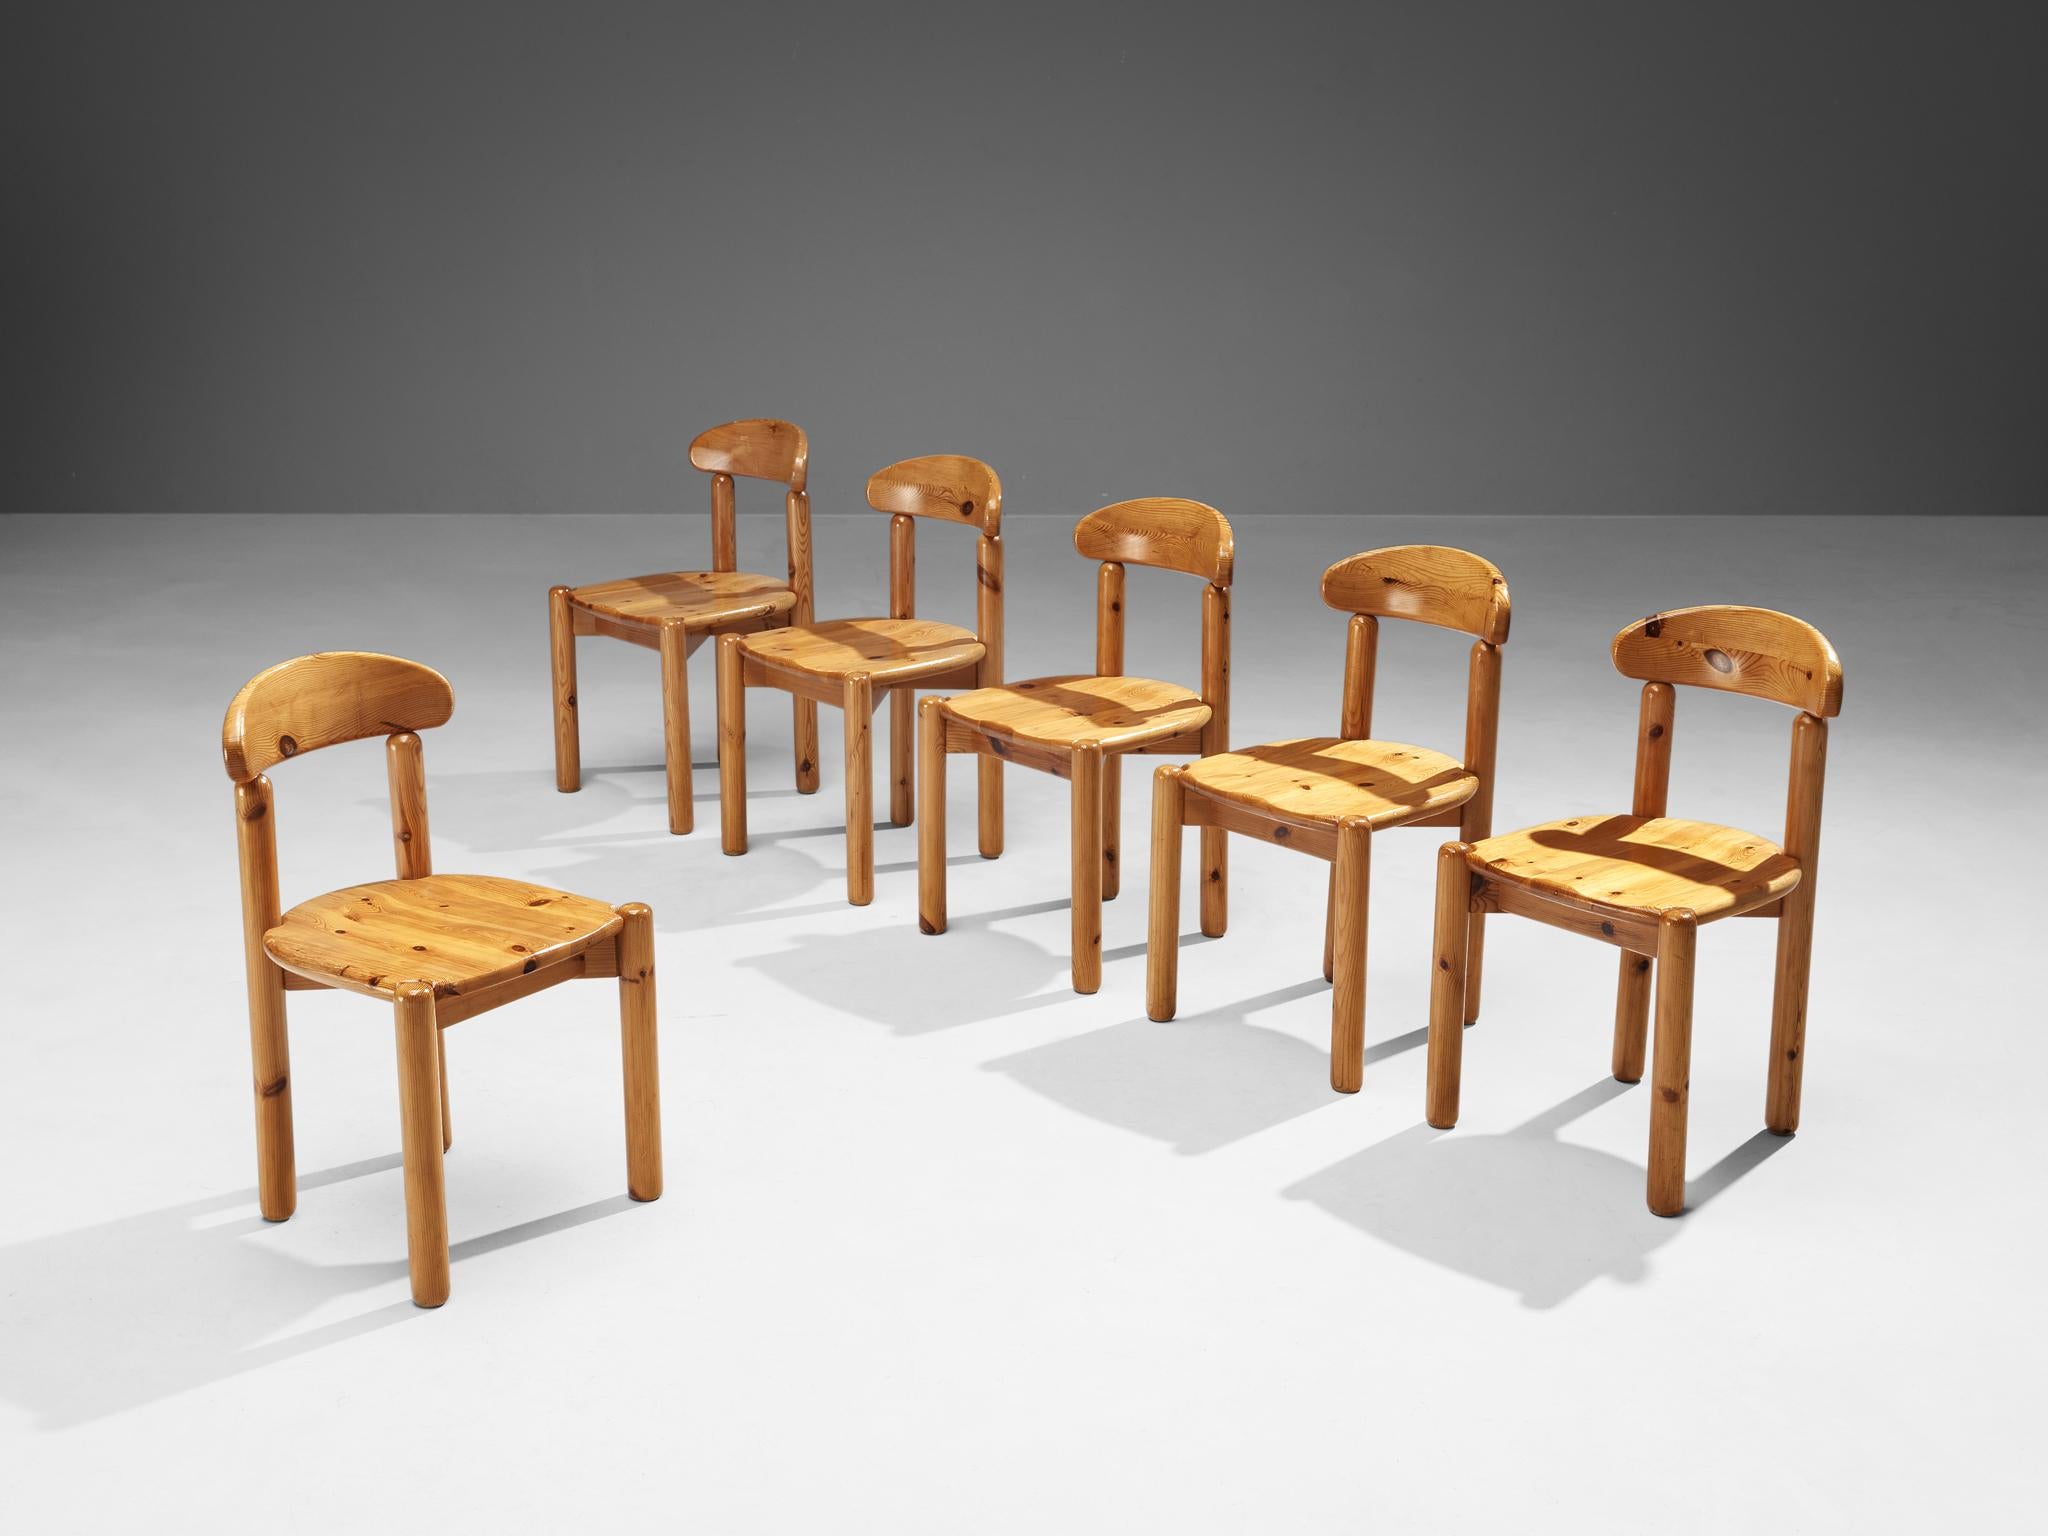 Rainer Daumiller for Hirtshals Sawmill, set of six dining chairs, pine, Denmark, 1970s

Beautiful, organic and natural dining chairs in solid pine designed by Rainer Daumiller. A simplistic design with a round seating and attention for the natural